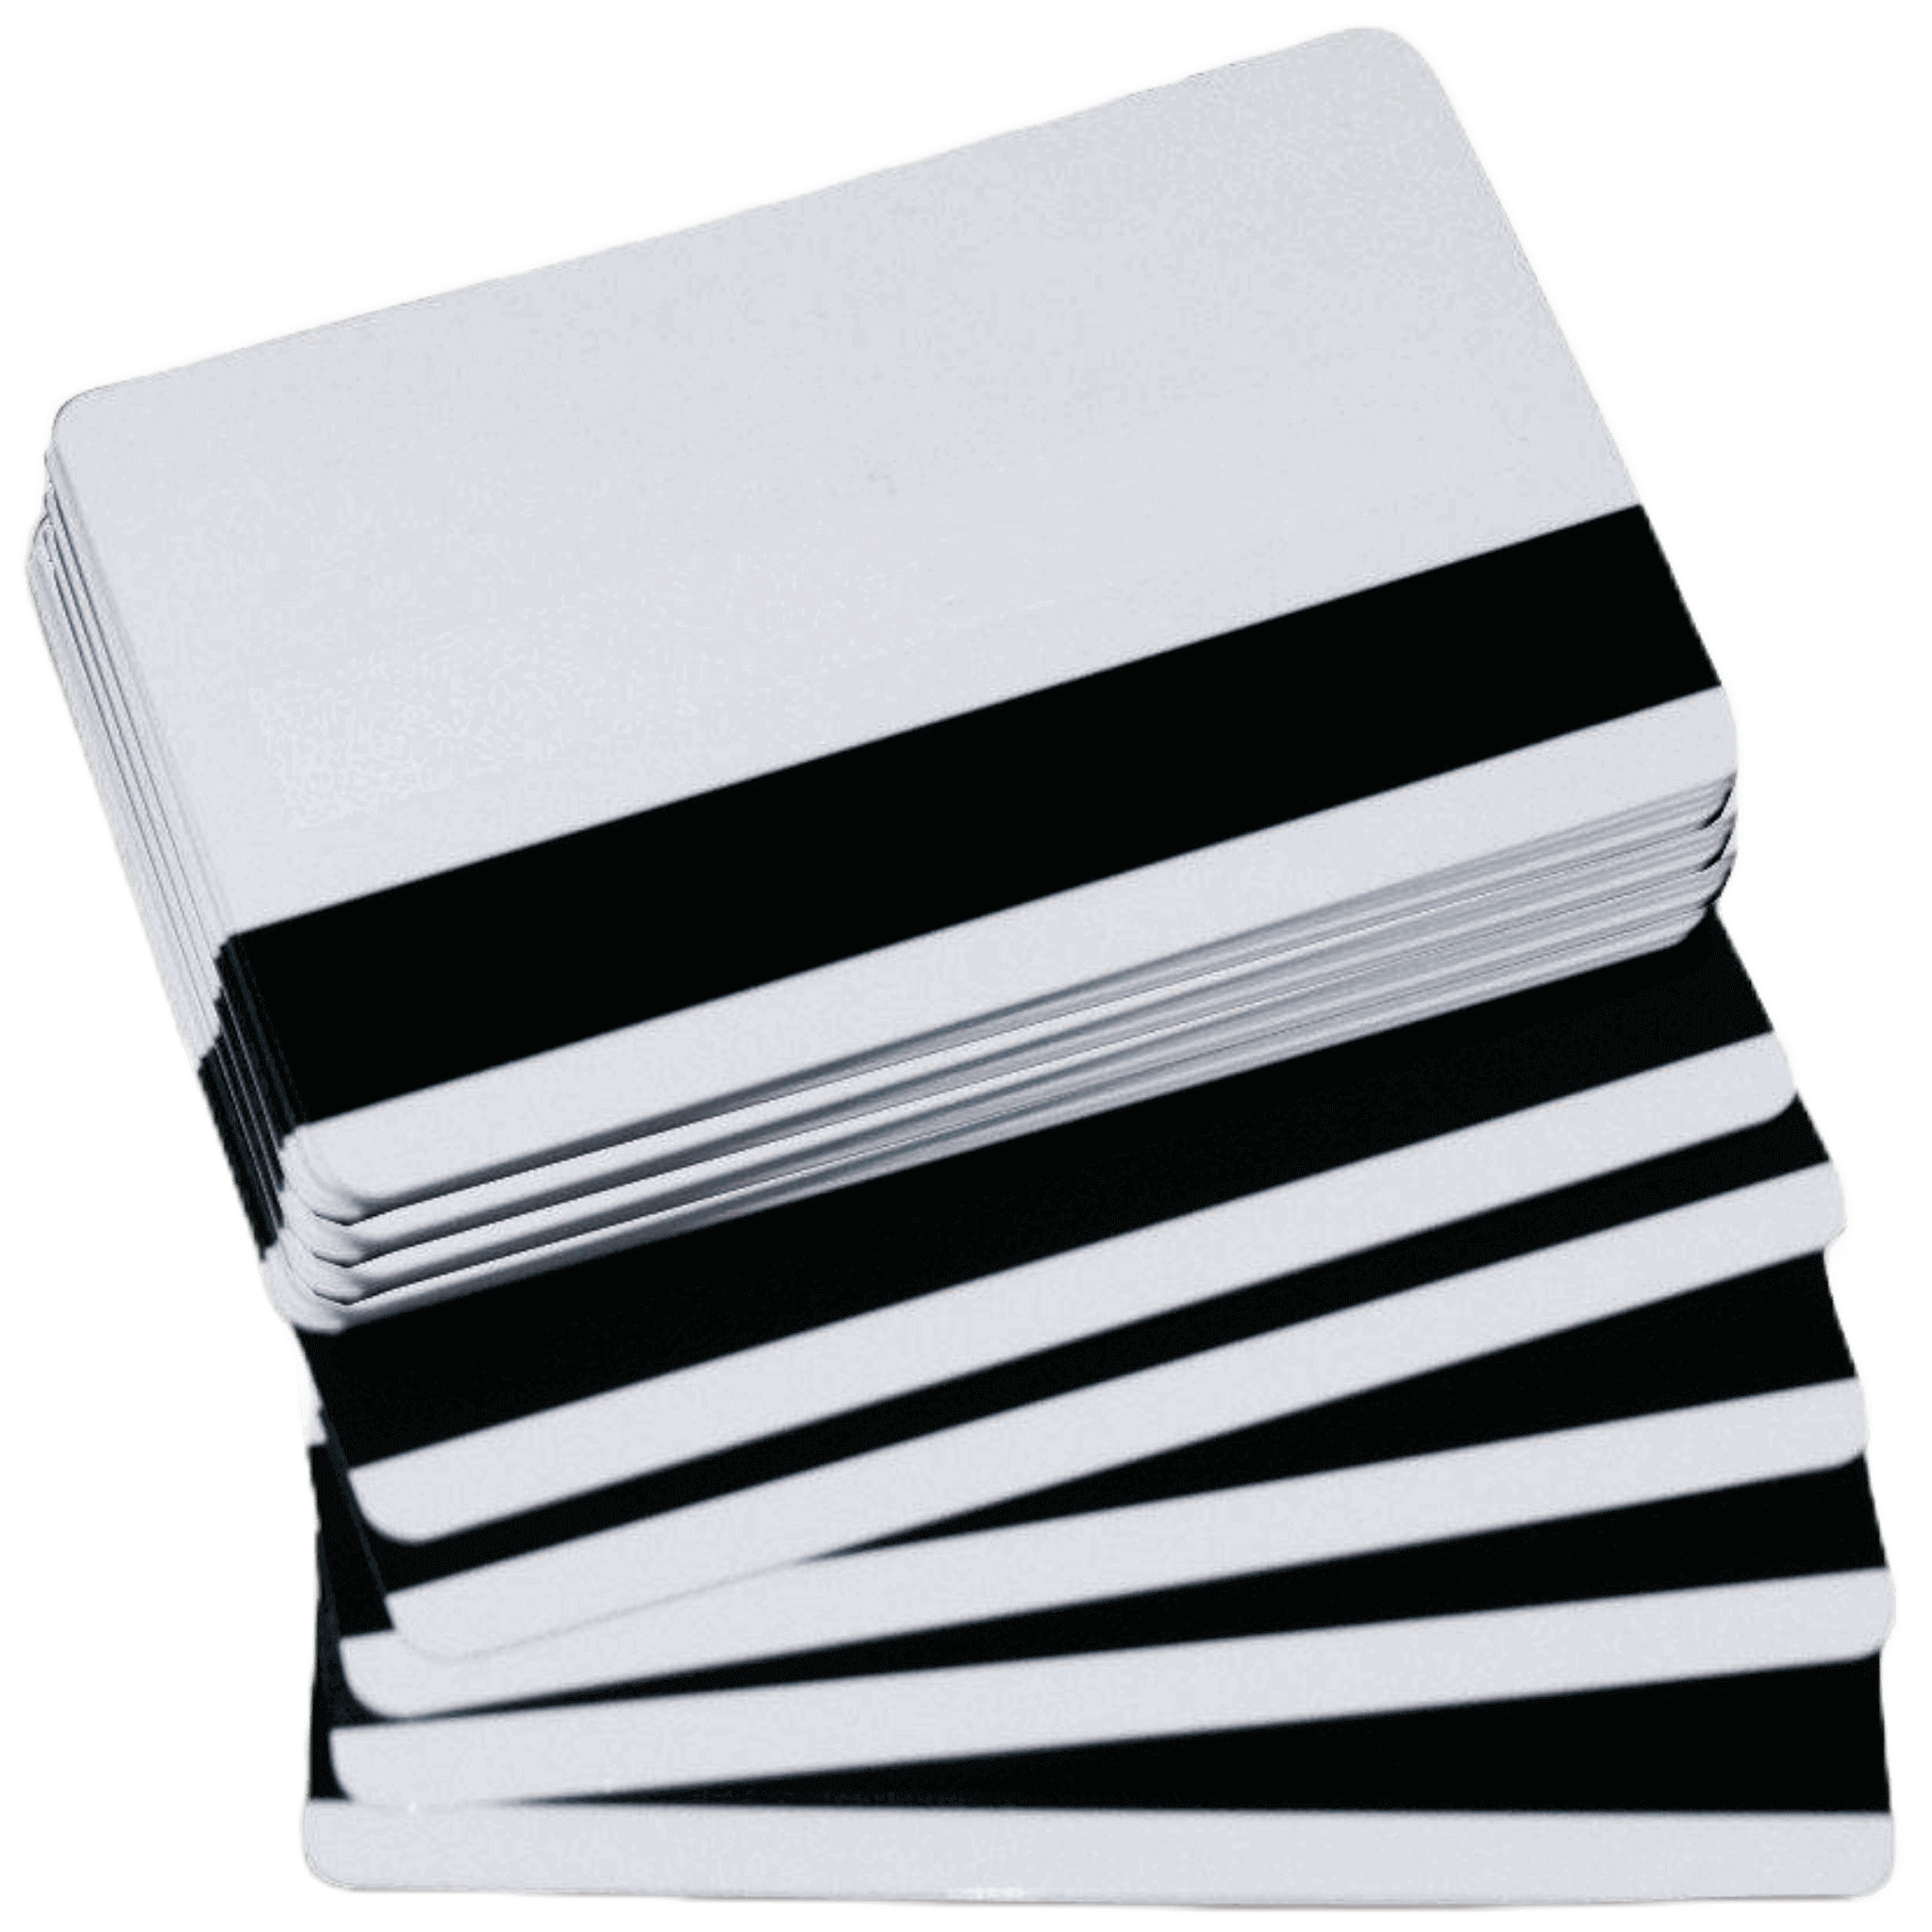 Paxton 695-573 Net2 Magnetic Stripe Cards, 10 Pack